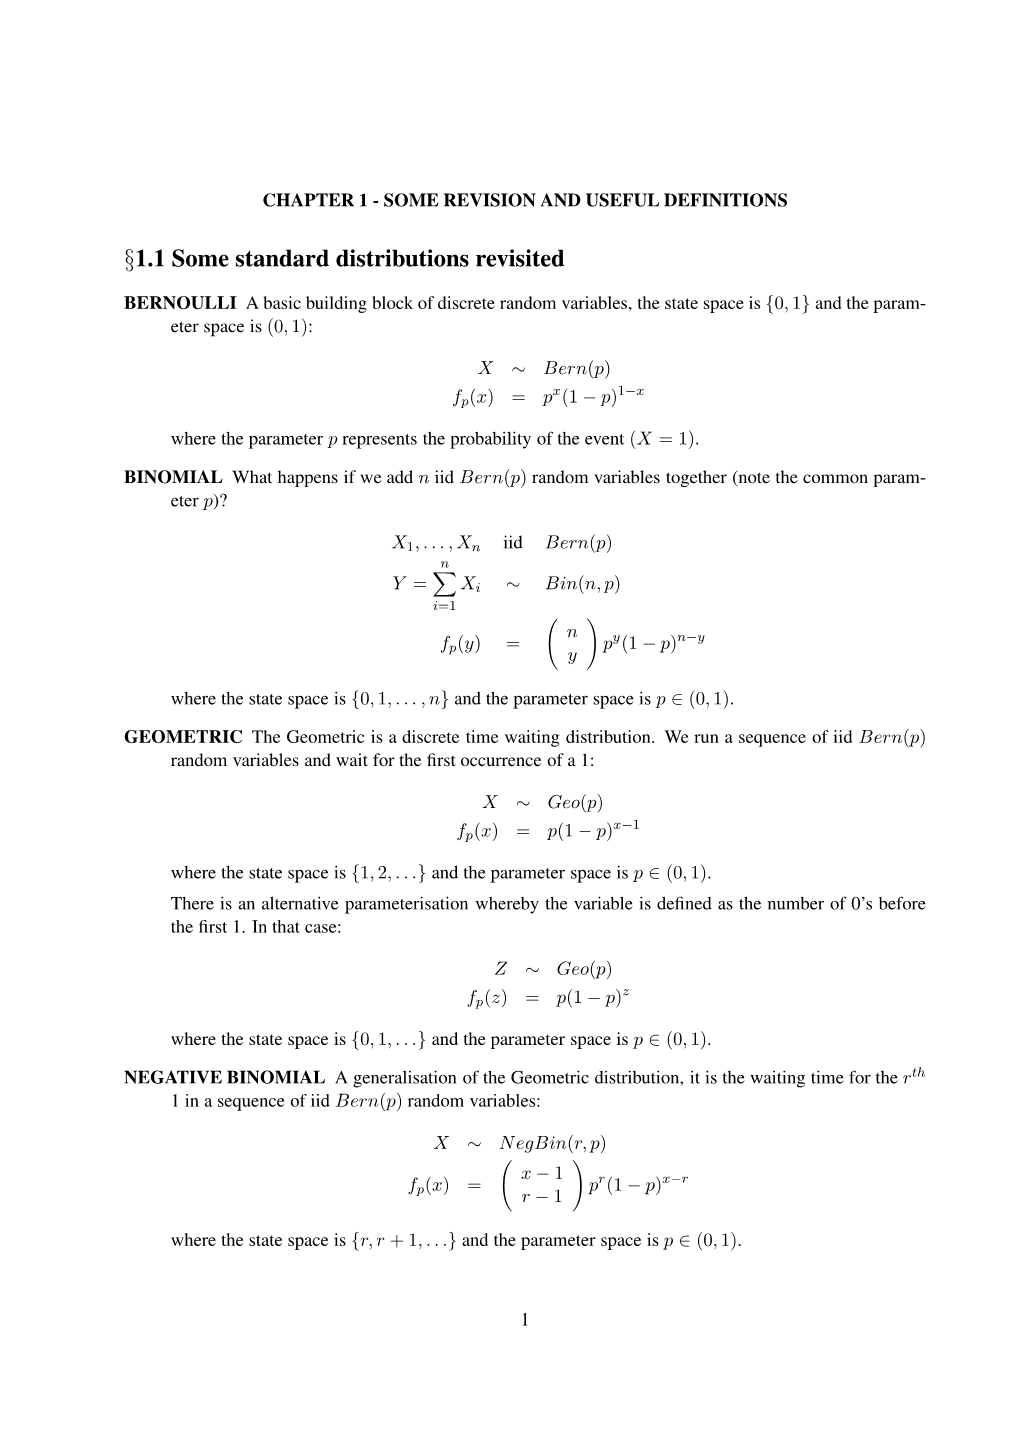 §1.1 Some Standard Distributions Revisited